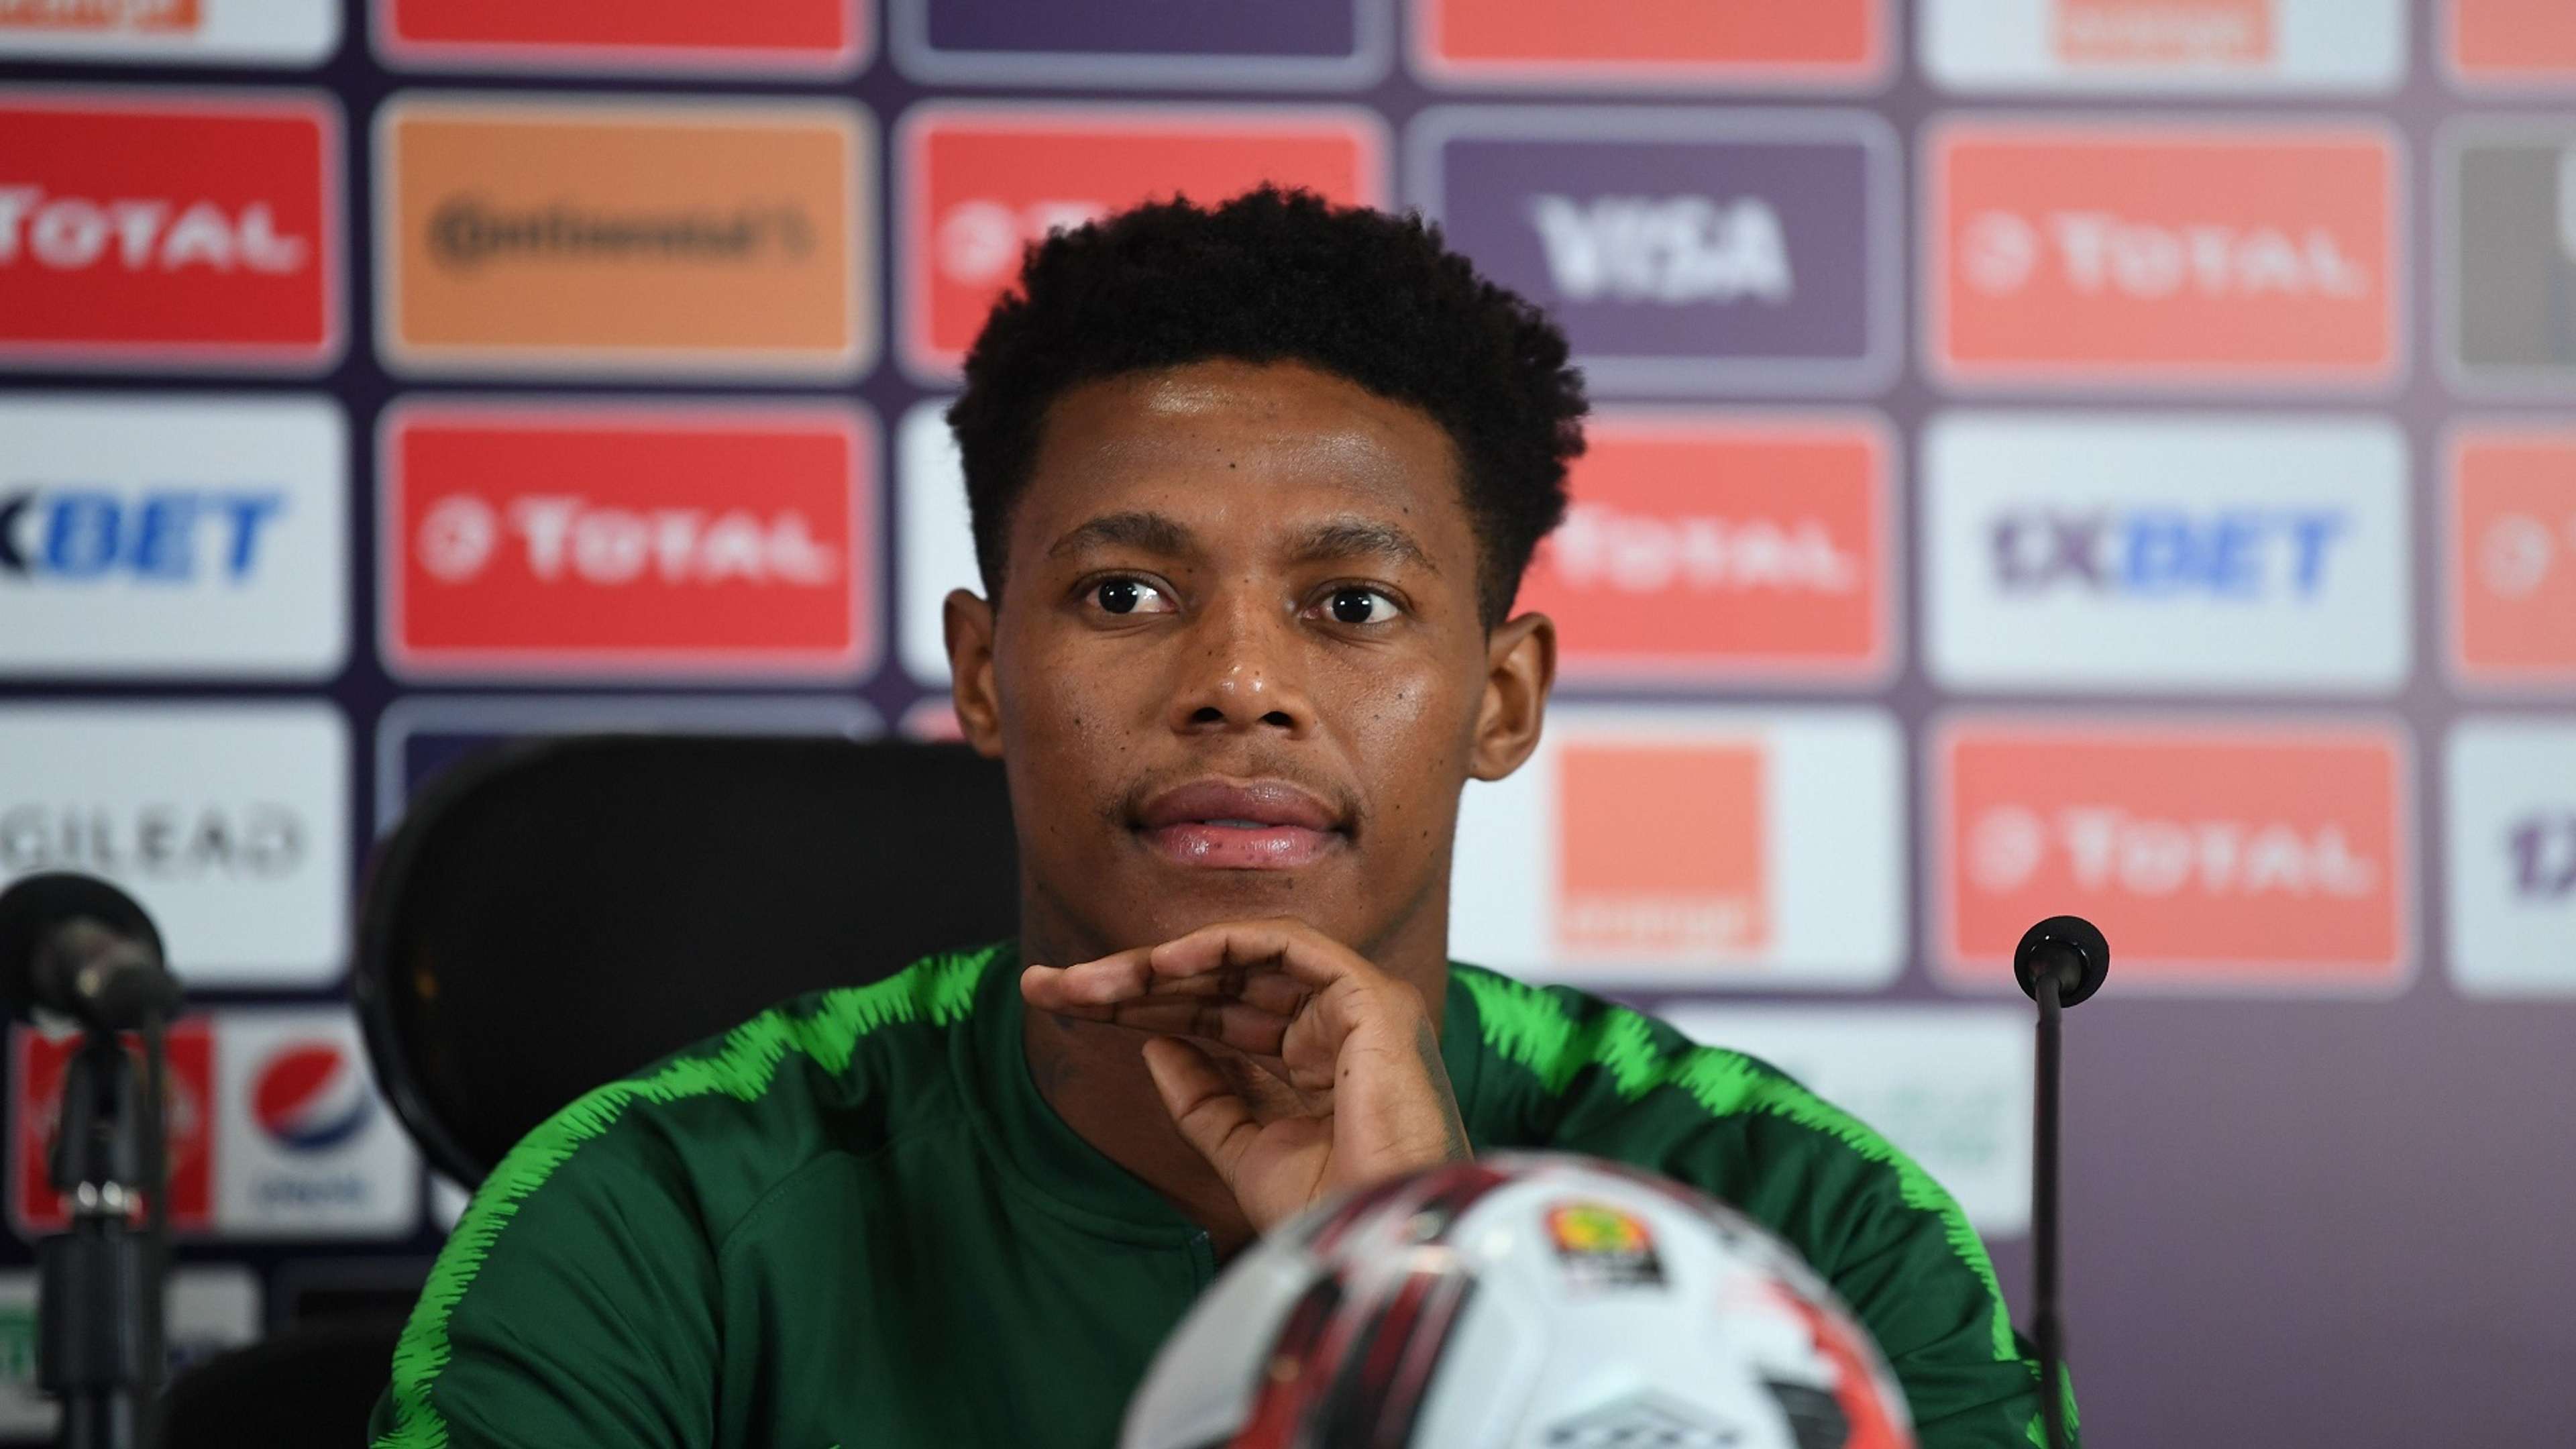 South Africa's midfielder Bongani Zungu attends a press conference at the Cairo International stadium in the capital, on July 5, 2019